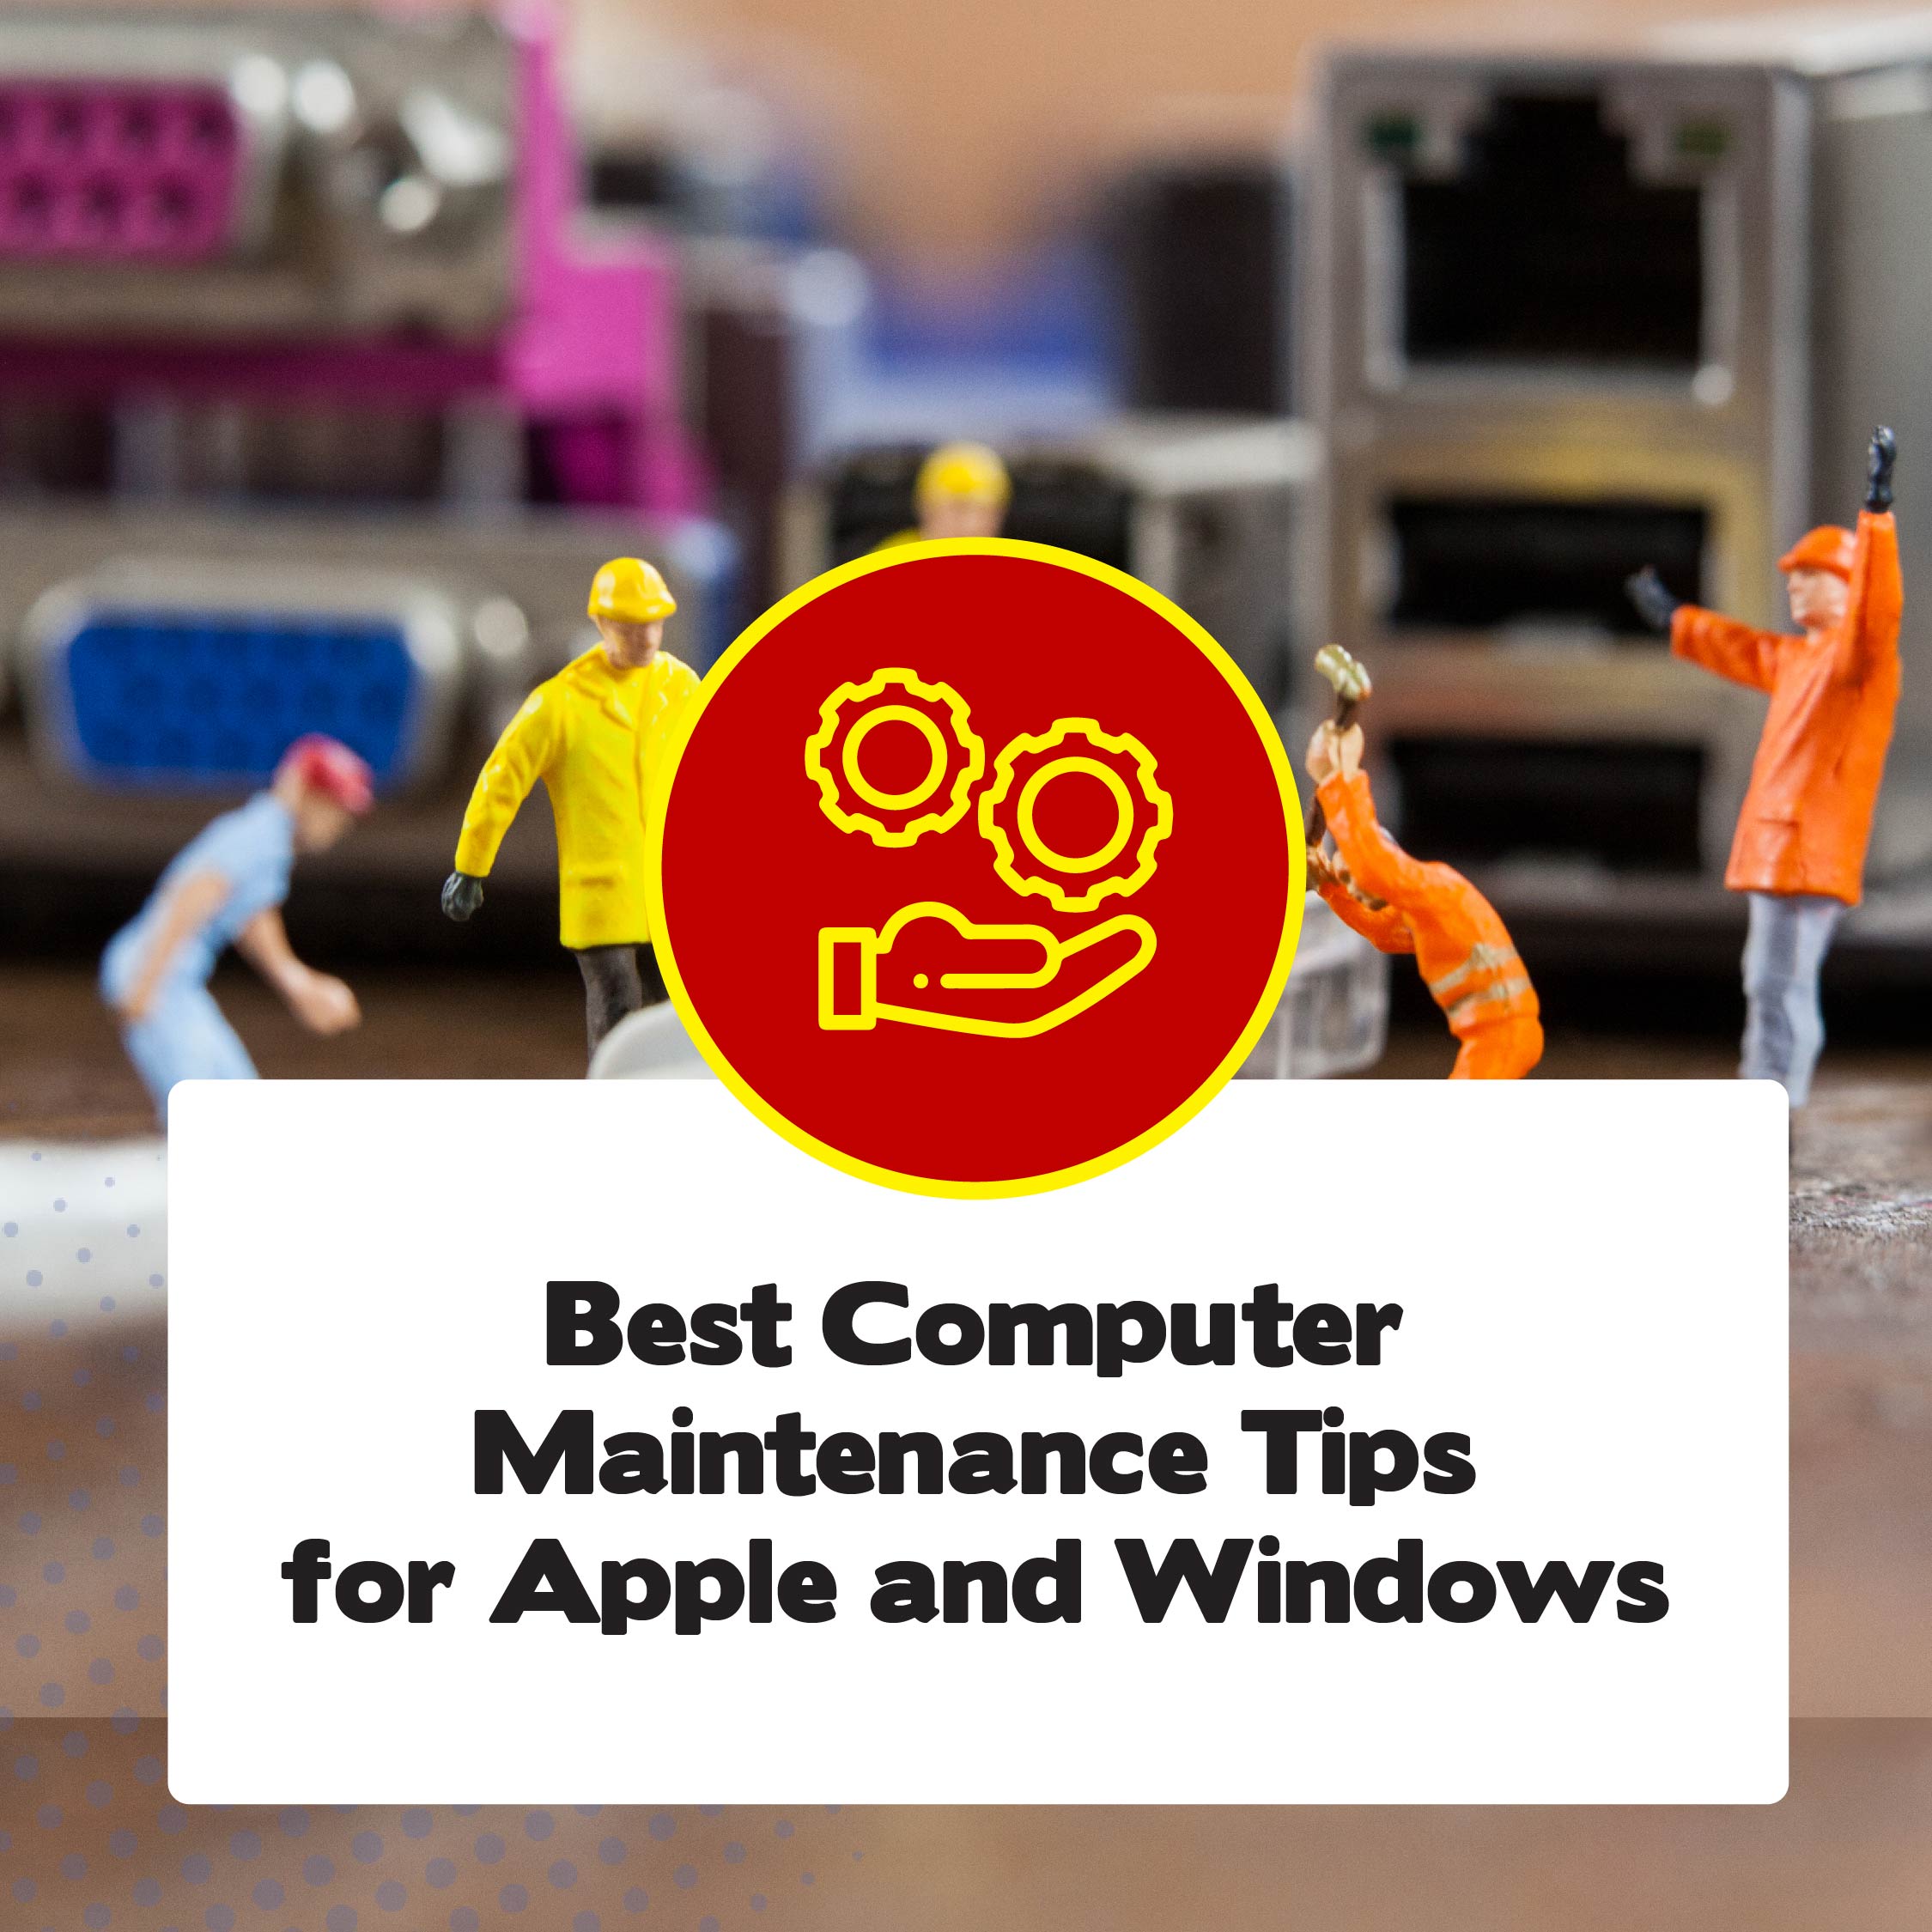 The best computer maintenance tips for windows and apple